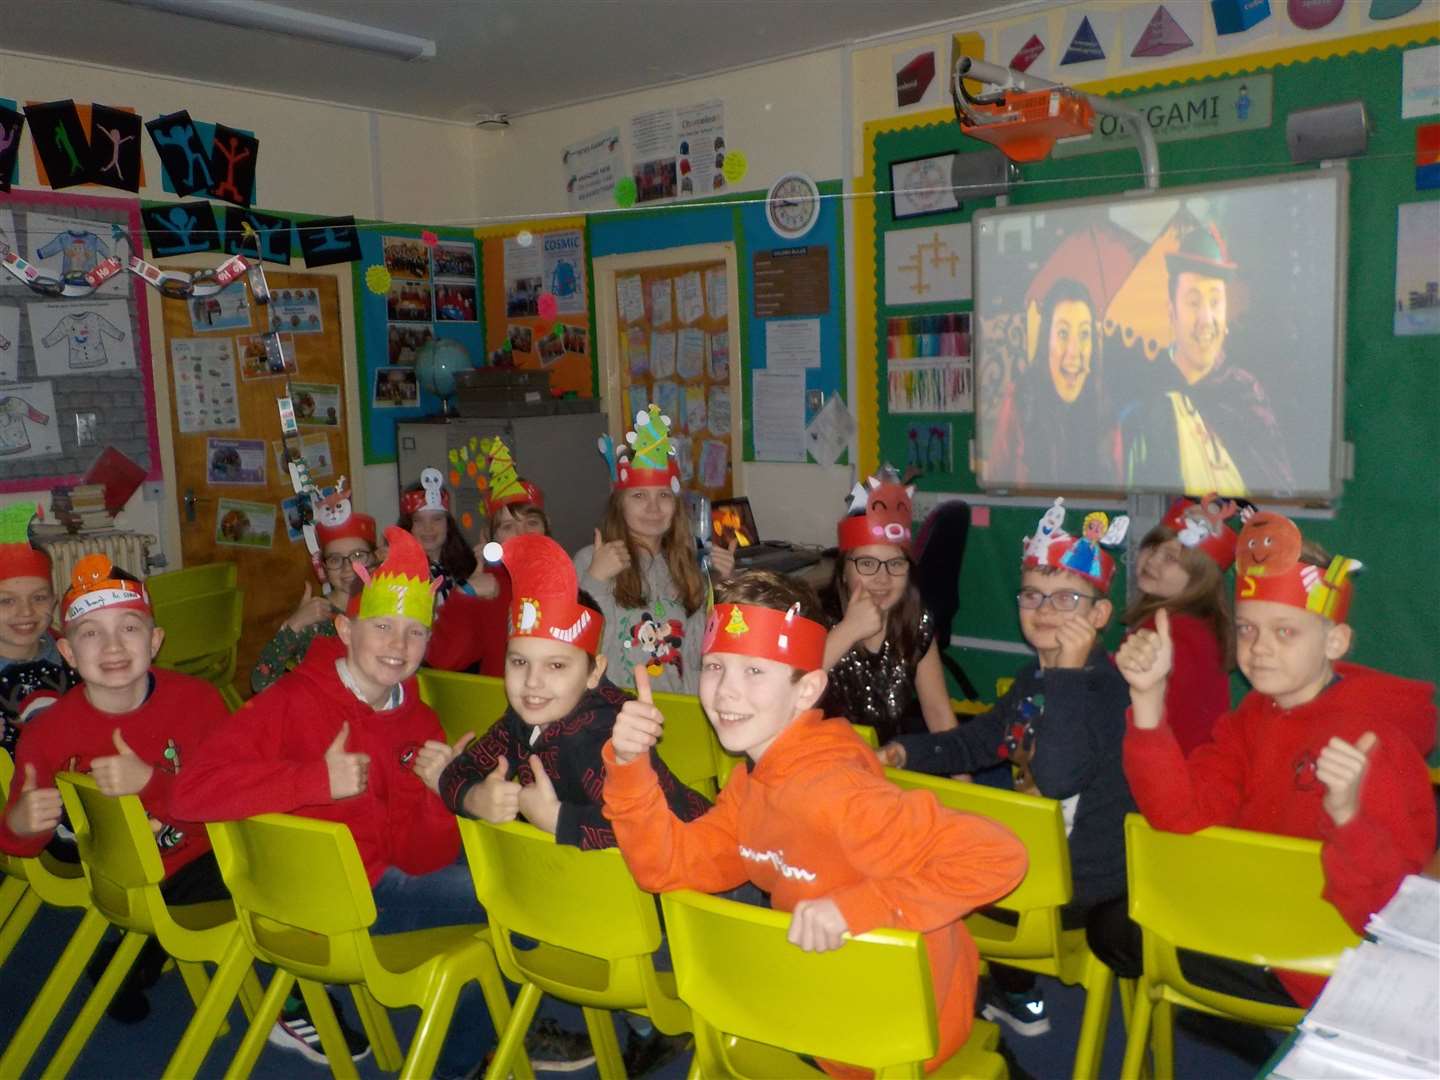 The panto was enjoyed by P6/7 pupils at Castletown Primary School.